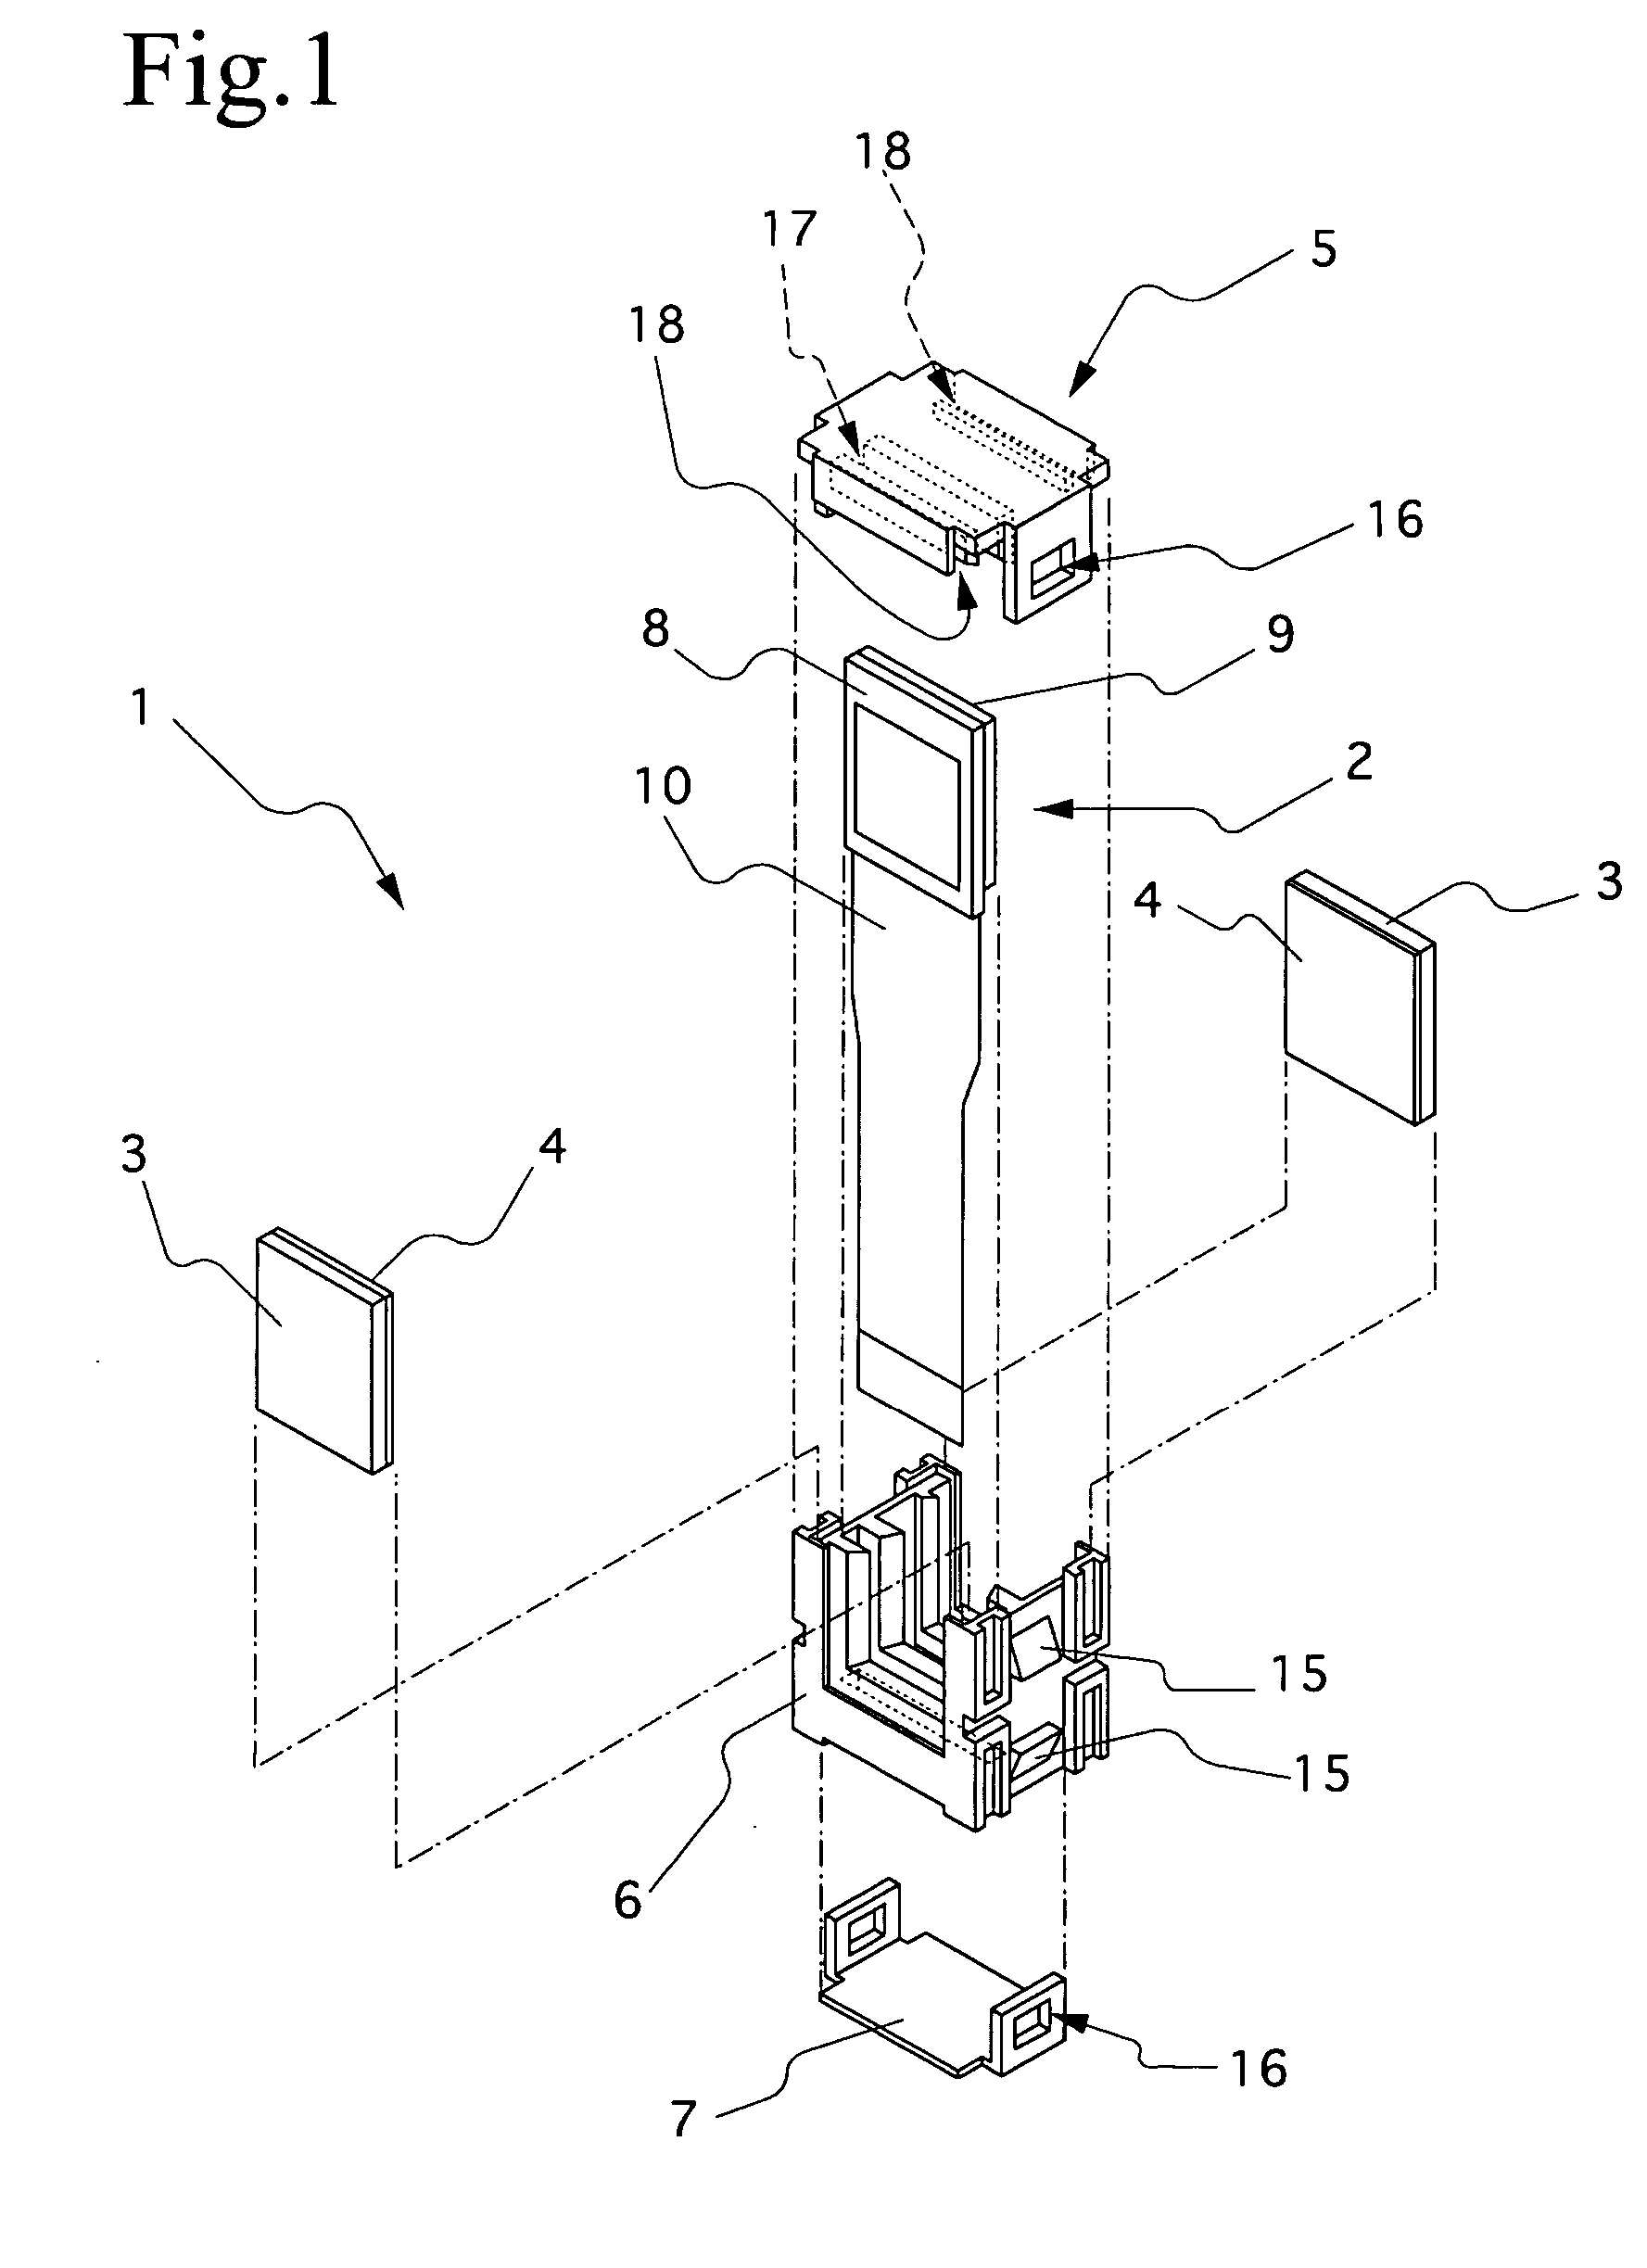 Liquid crystal display device and video camera